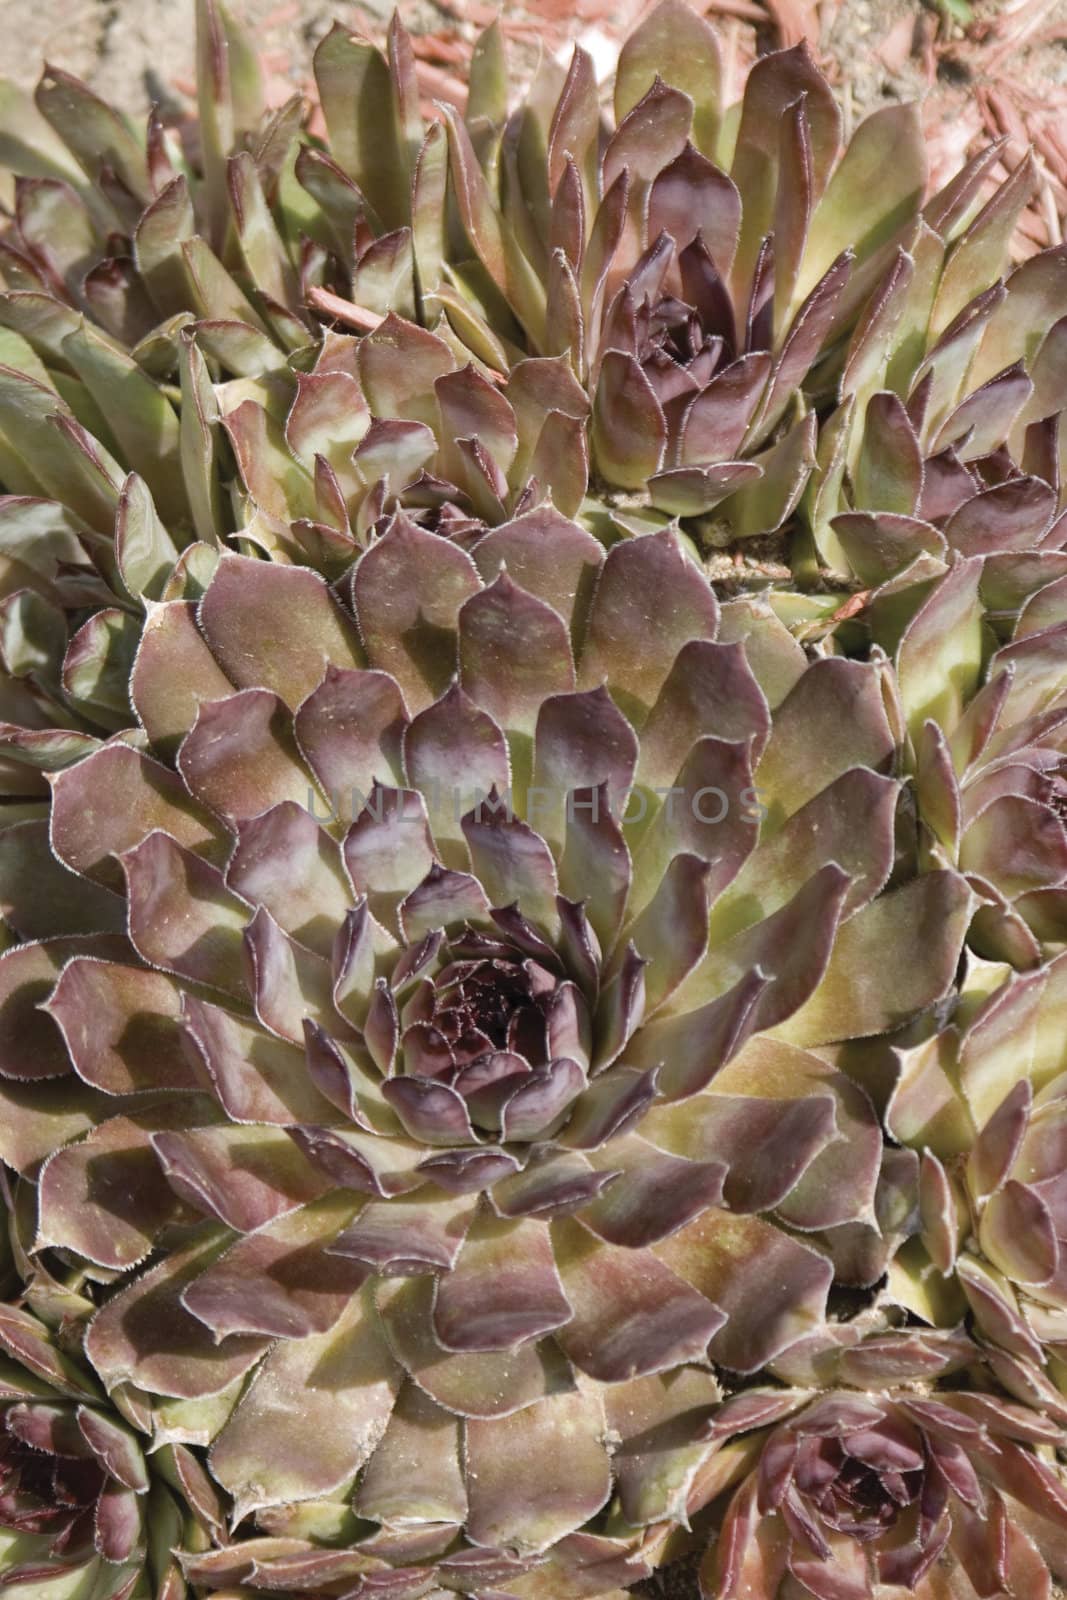 Close up of an artichokes flower patch, that has open